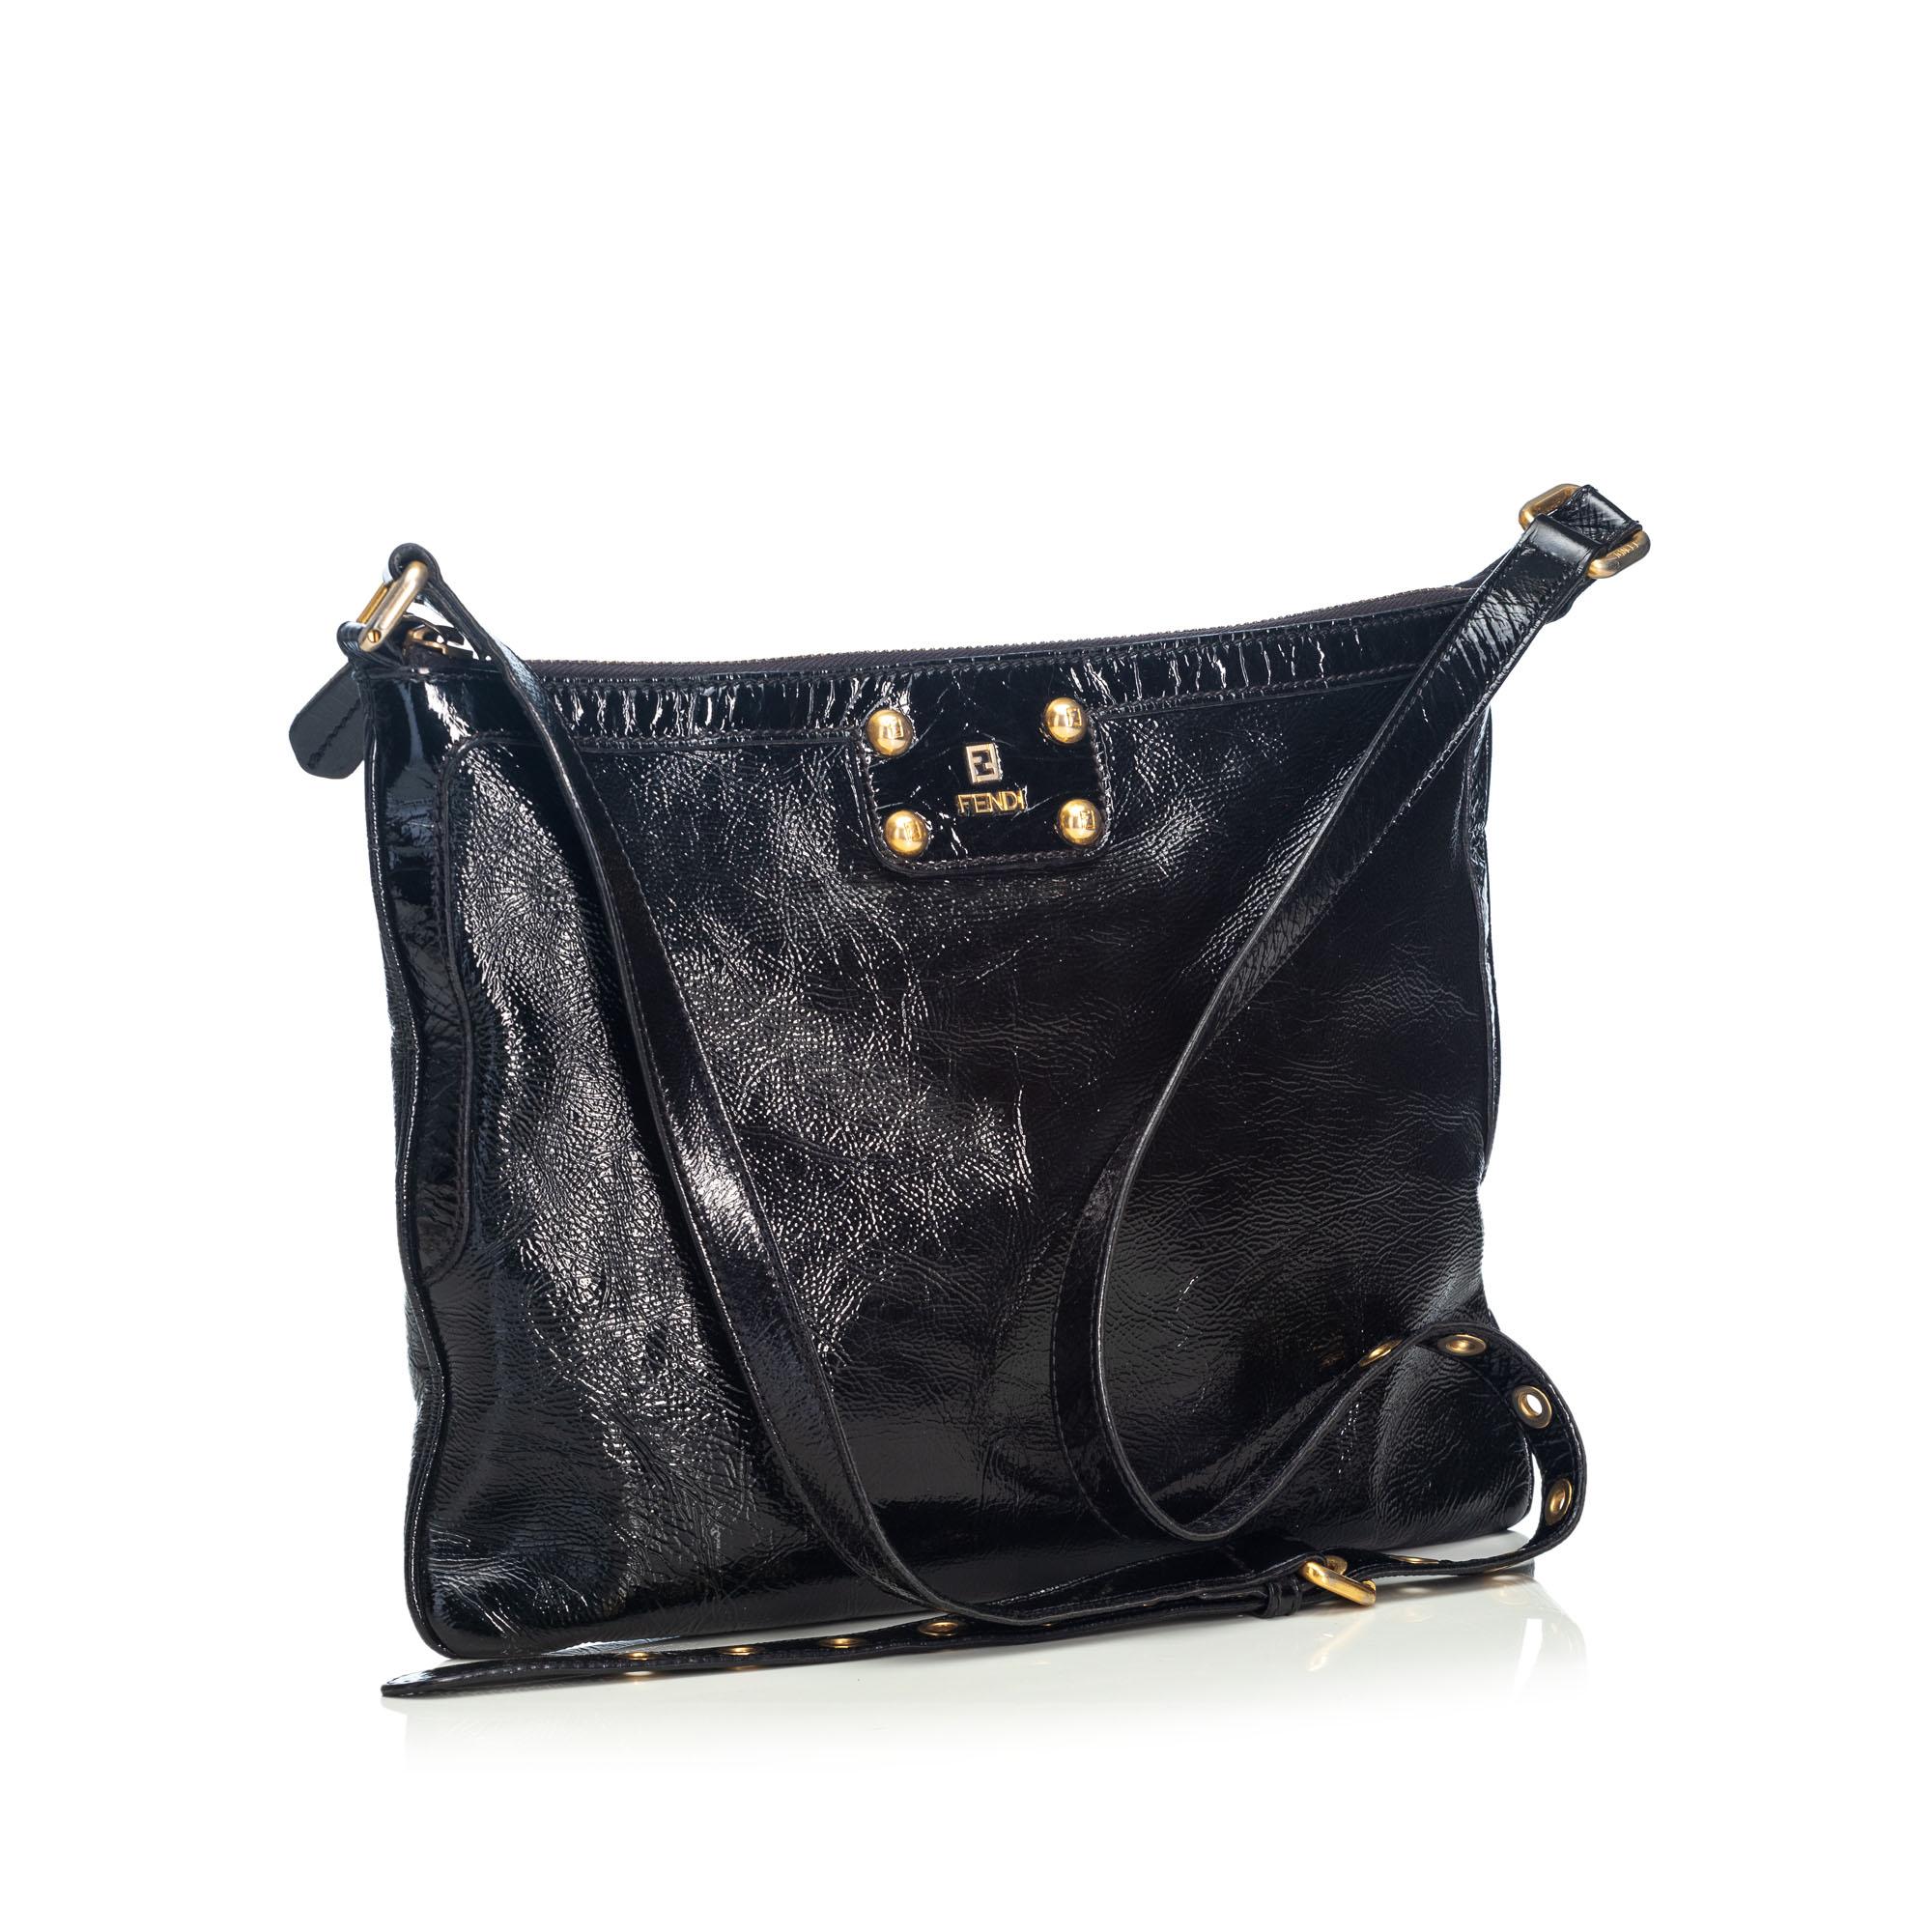 This crossbody bag features a patent leather body, a flat strap, a top zip closure, and an interior slip pocket. It carries as B+ condition rating.

Inclusions: 
This item does not come with inclusions.

Dimensions:
Length: 35.00 cm
Width: 27.00